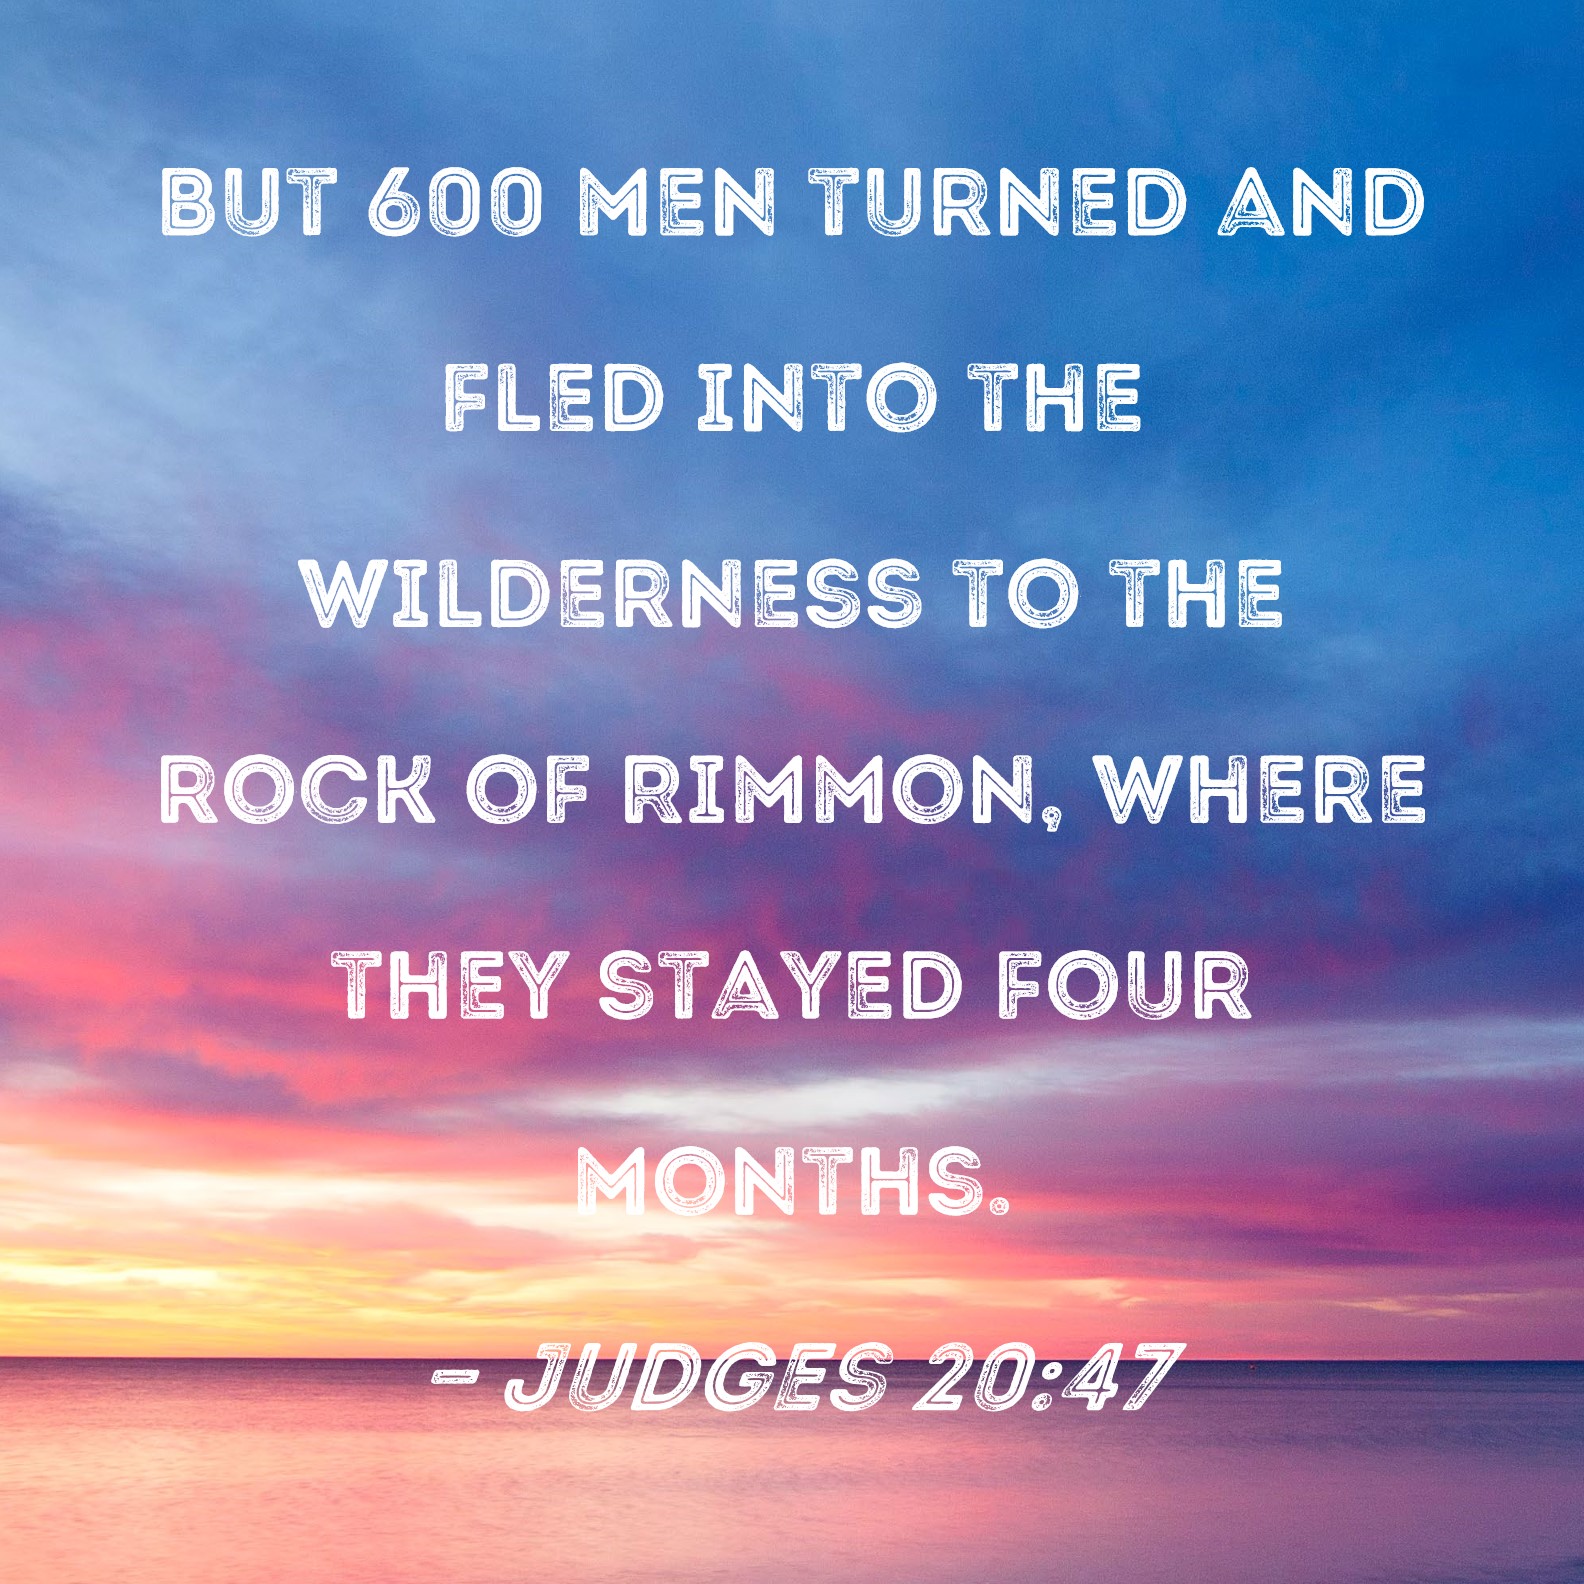 Judges 20 commentary